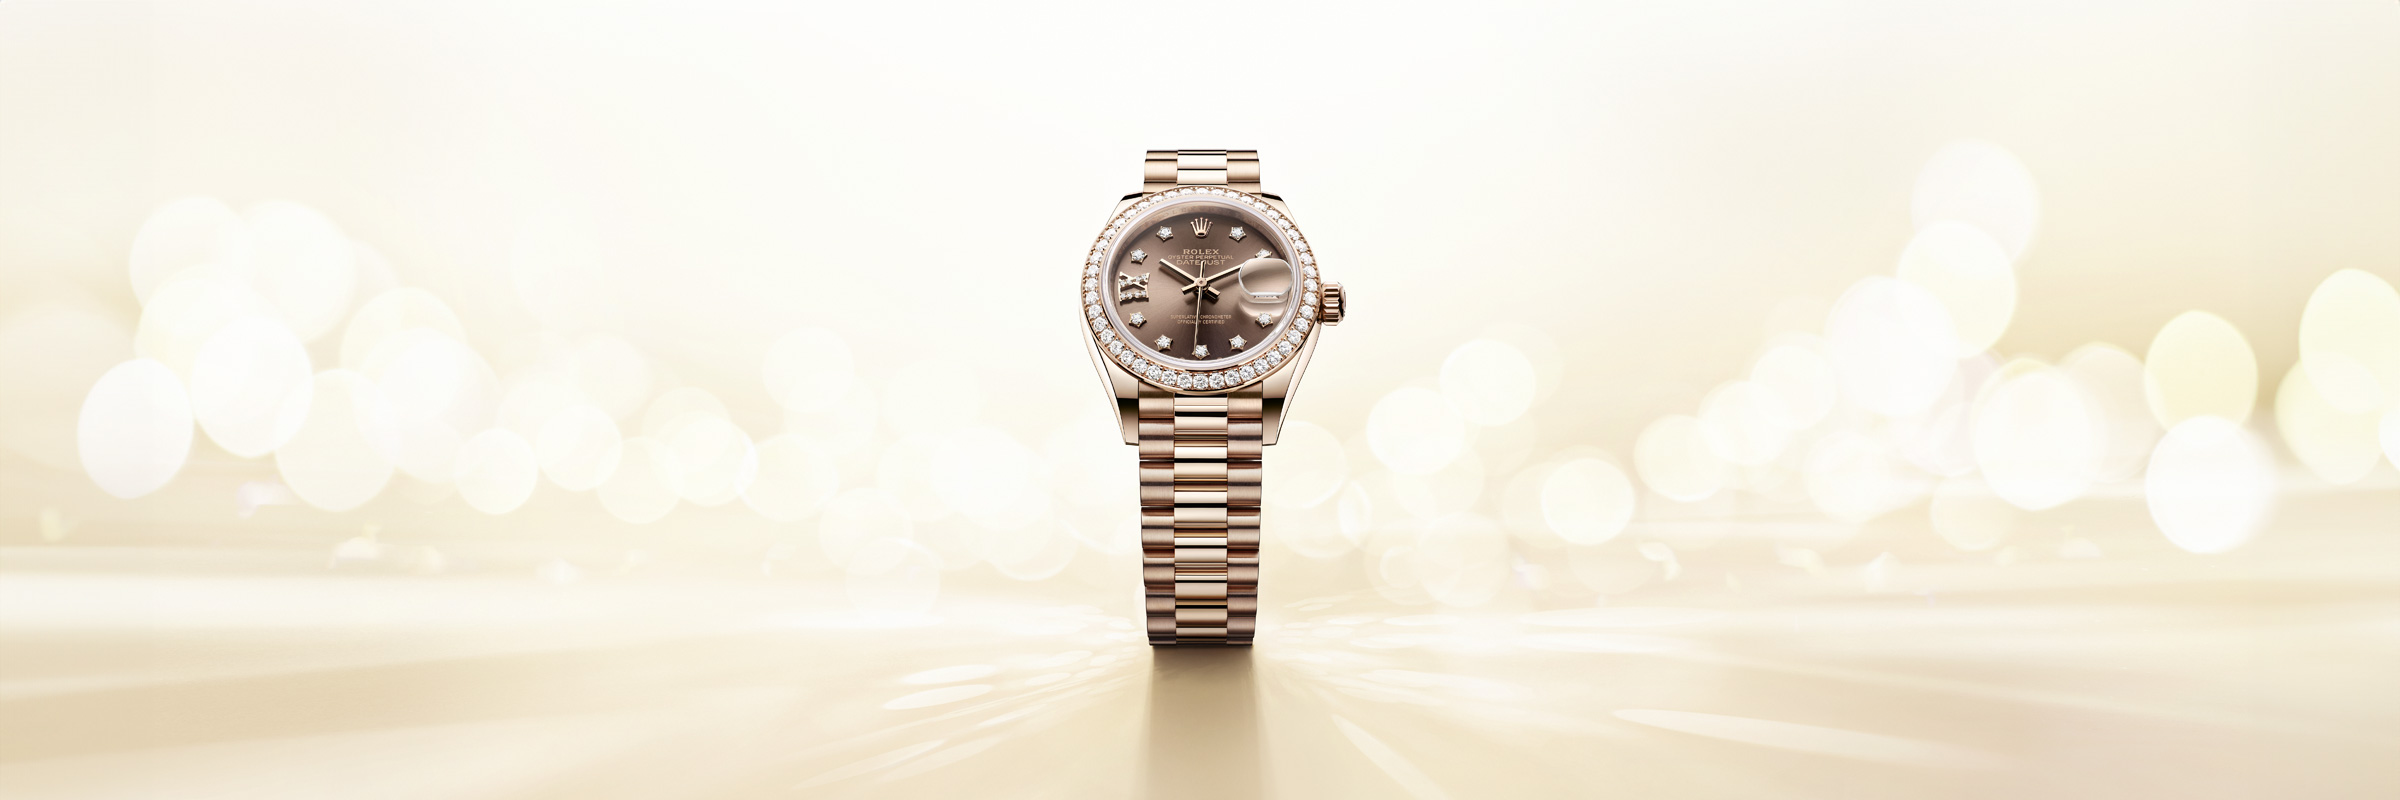 Lady-Datejust watches